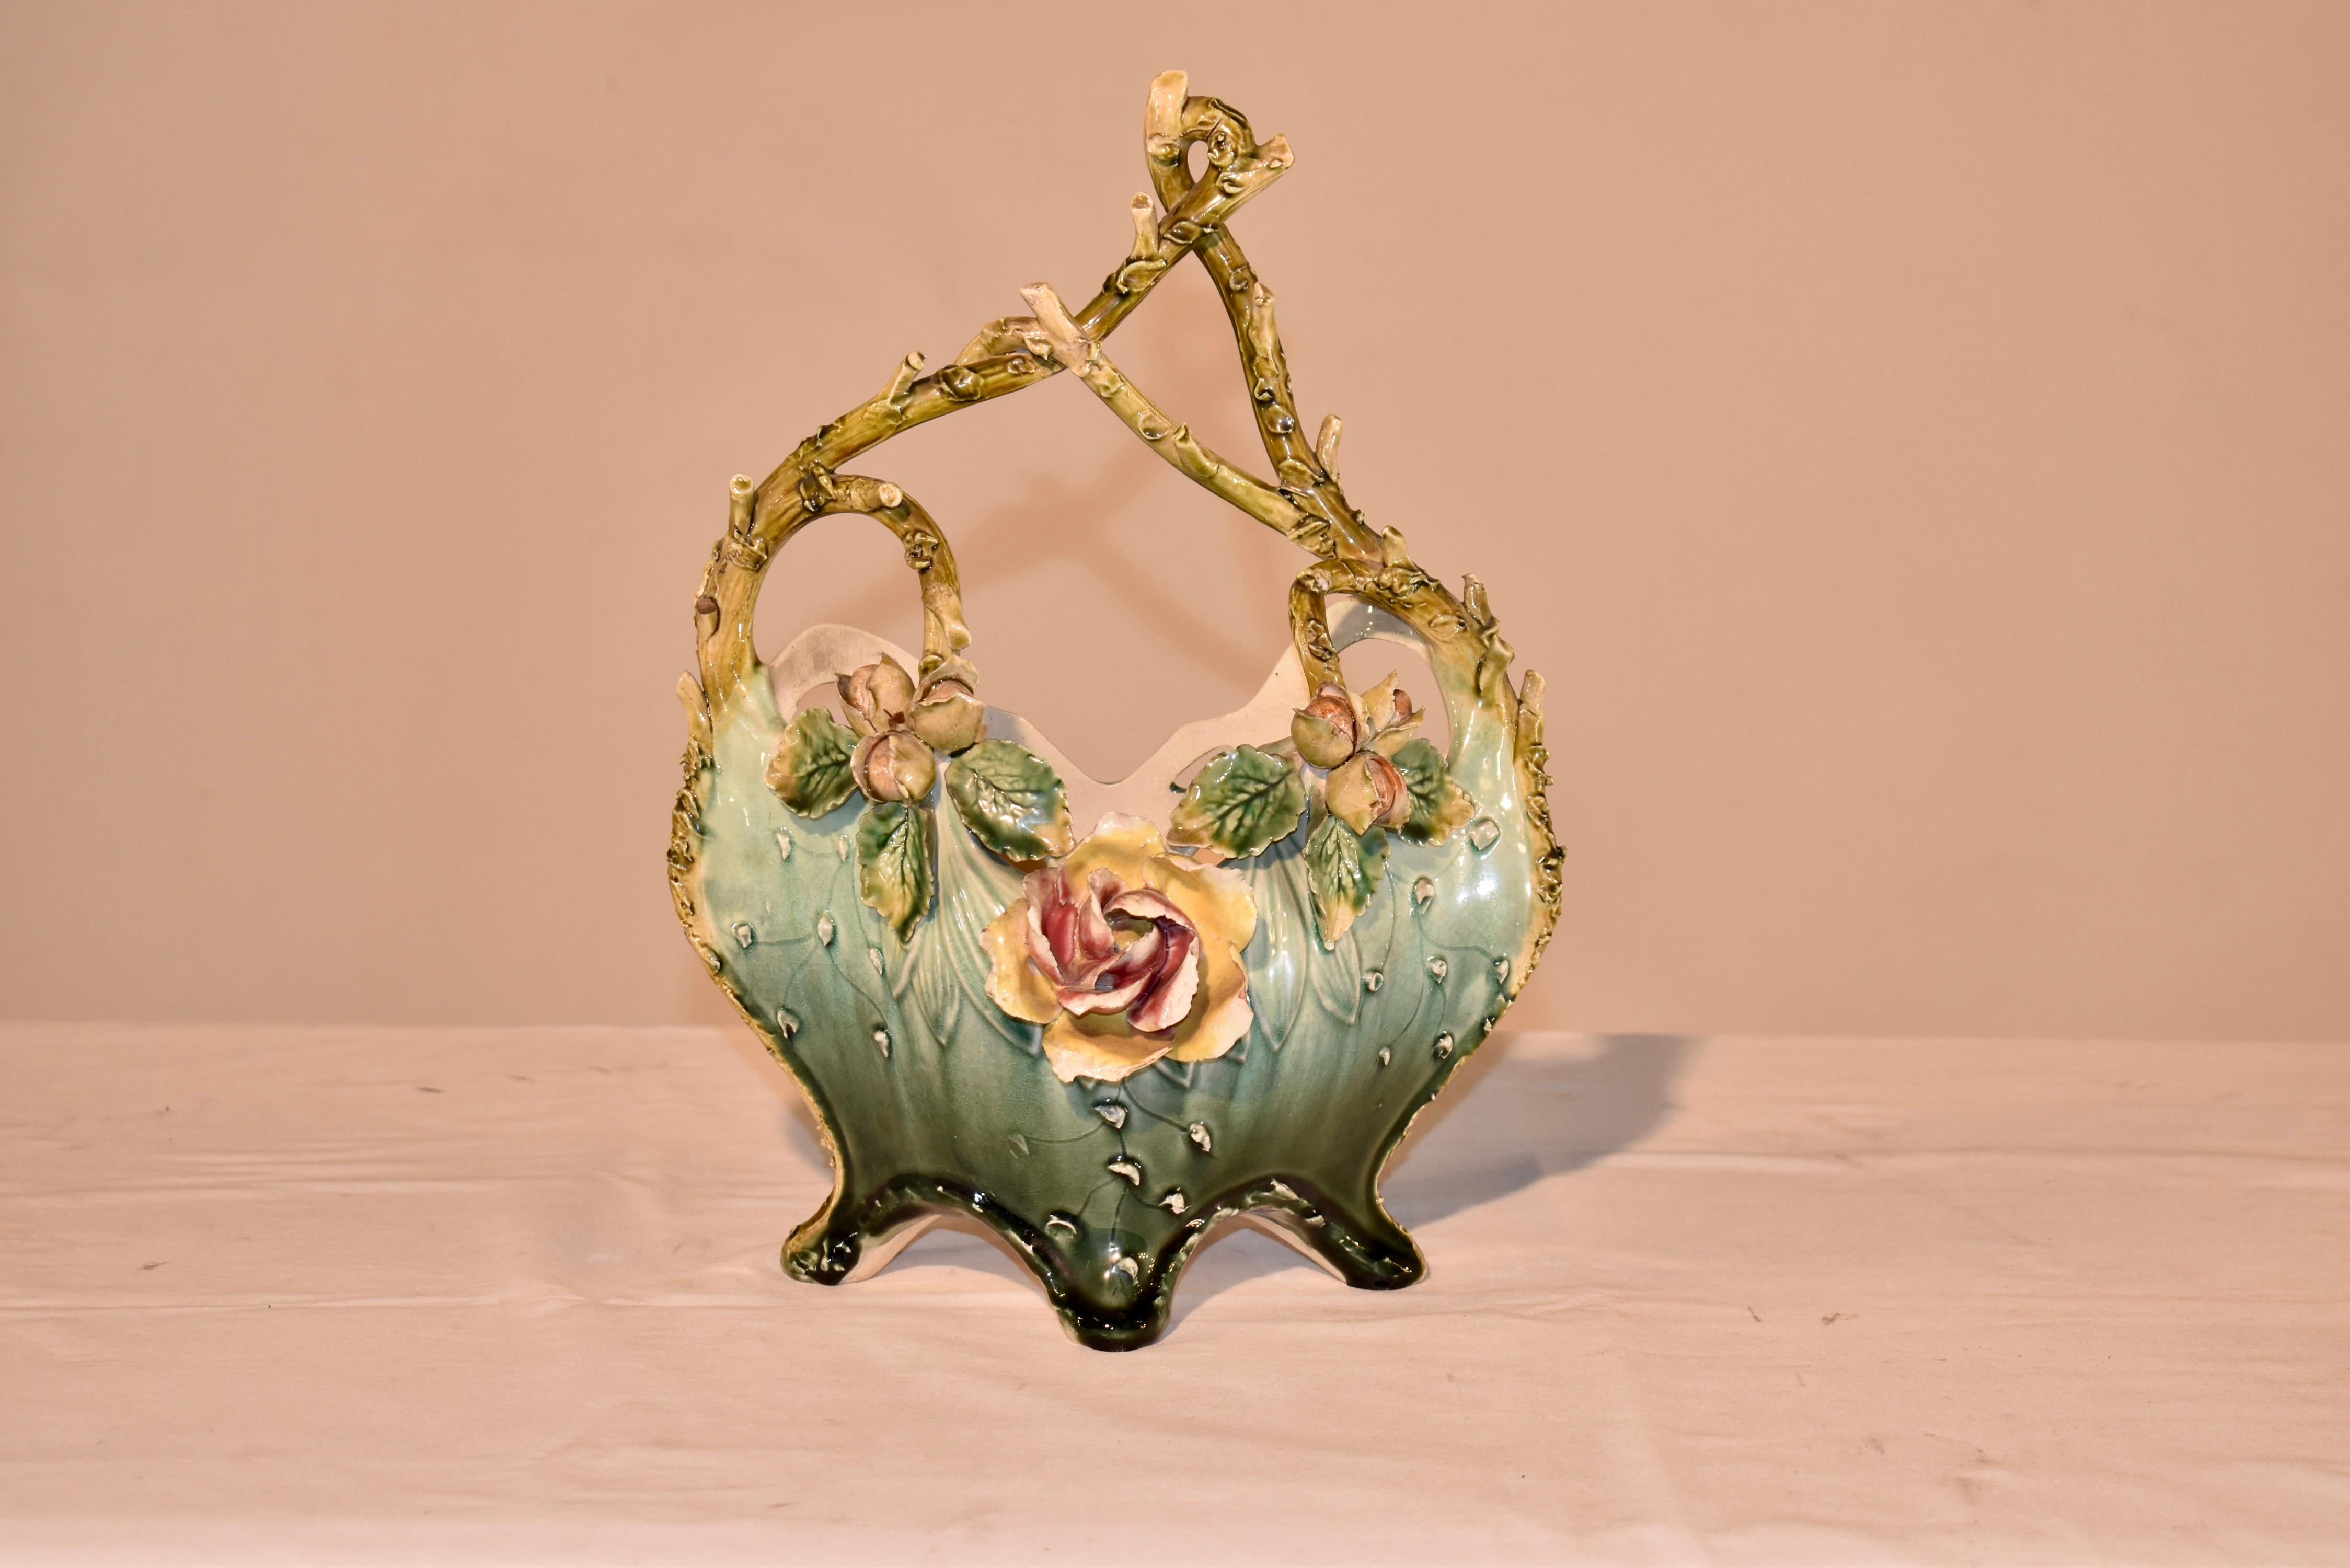 19th century French majolica basket with the most gorgeous twig handles we have had the pleasure to see!  The handles miraculously have no damage, just a firing crack at the very top where the handle bends, as is pictured.  The twig handles go along